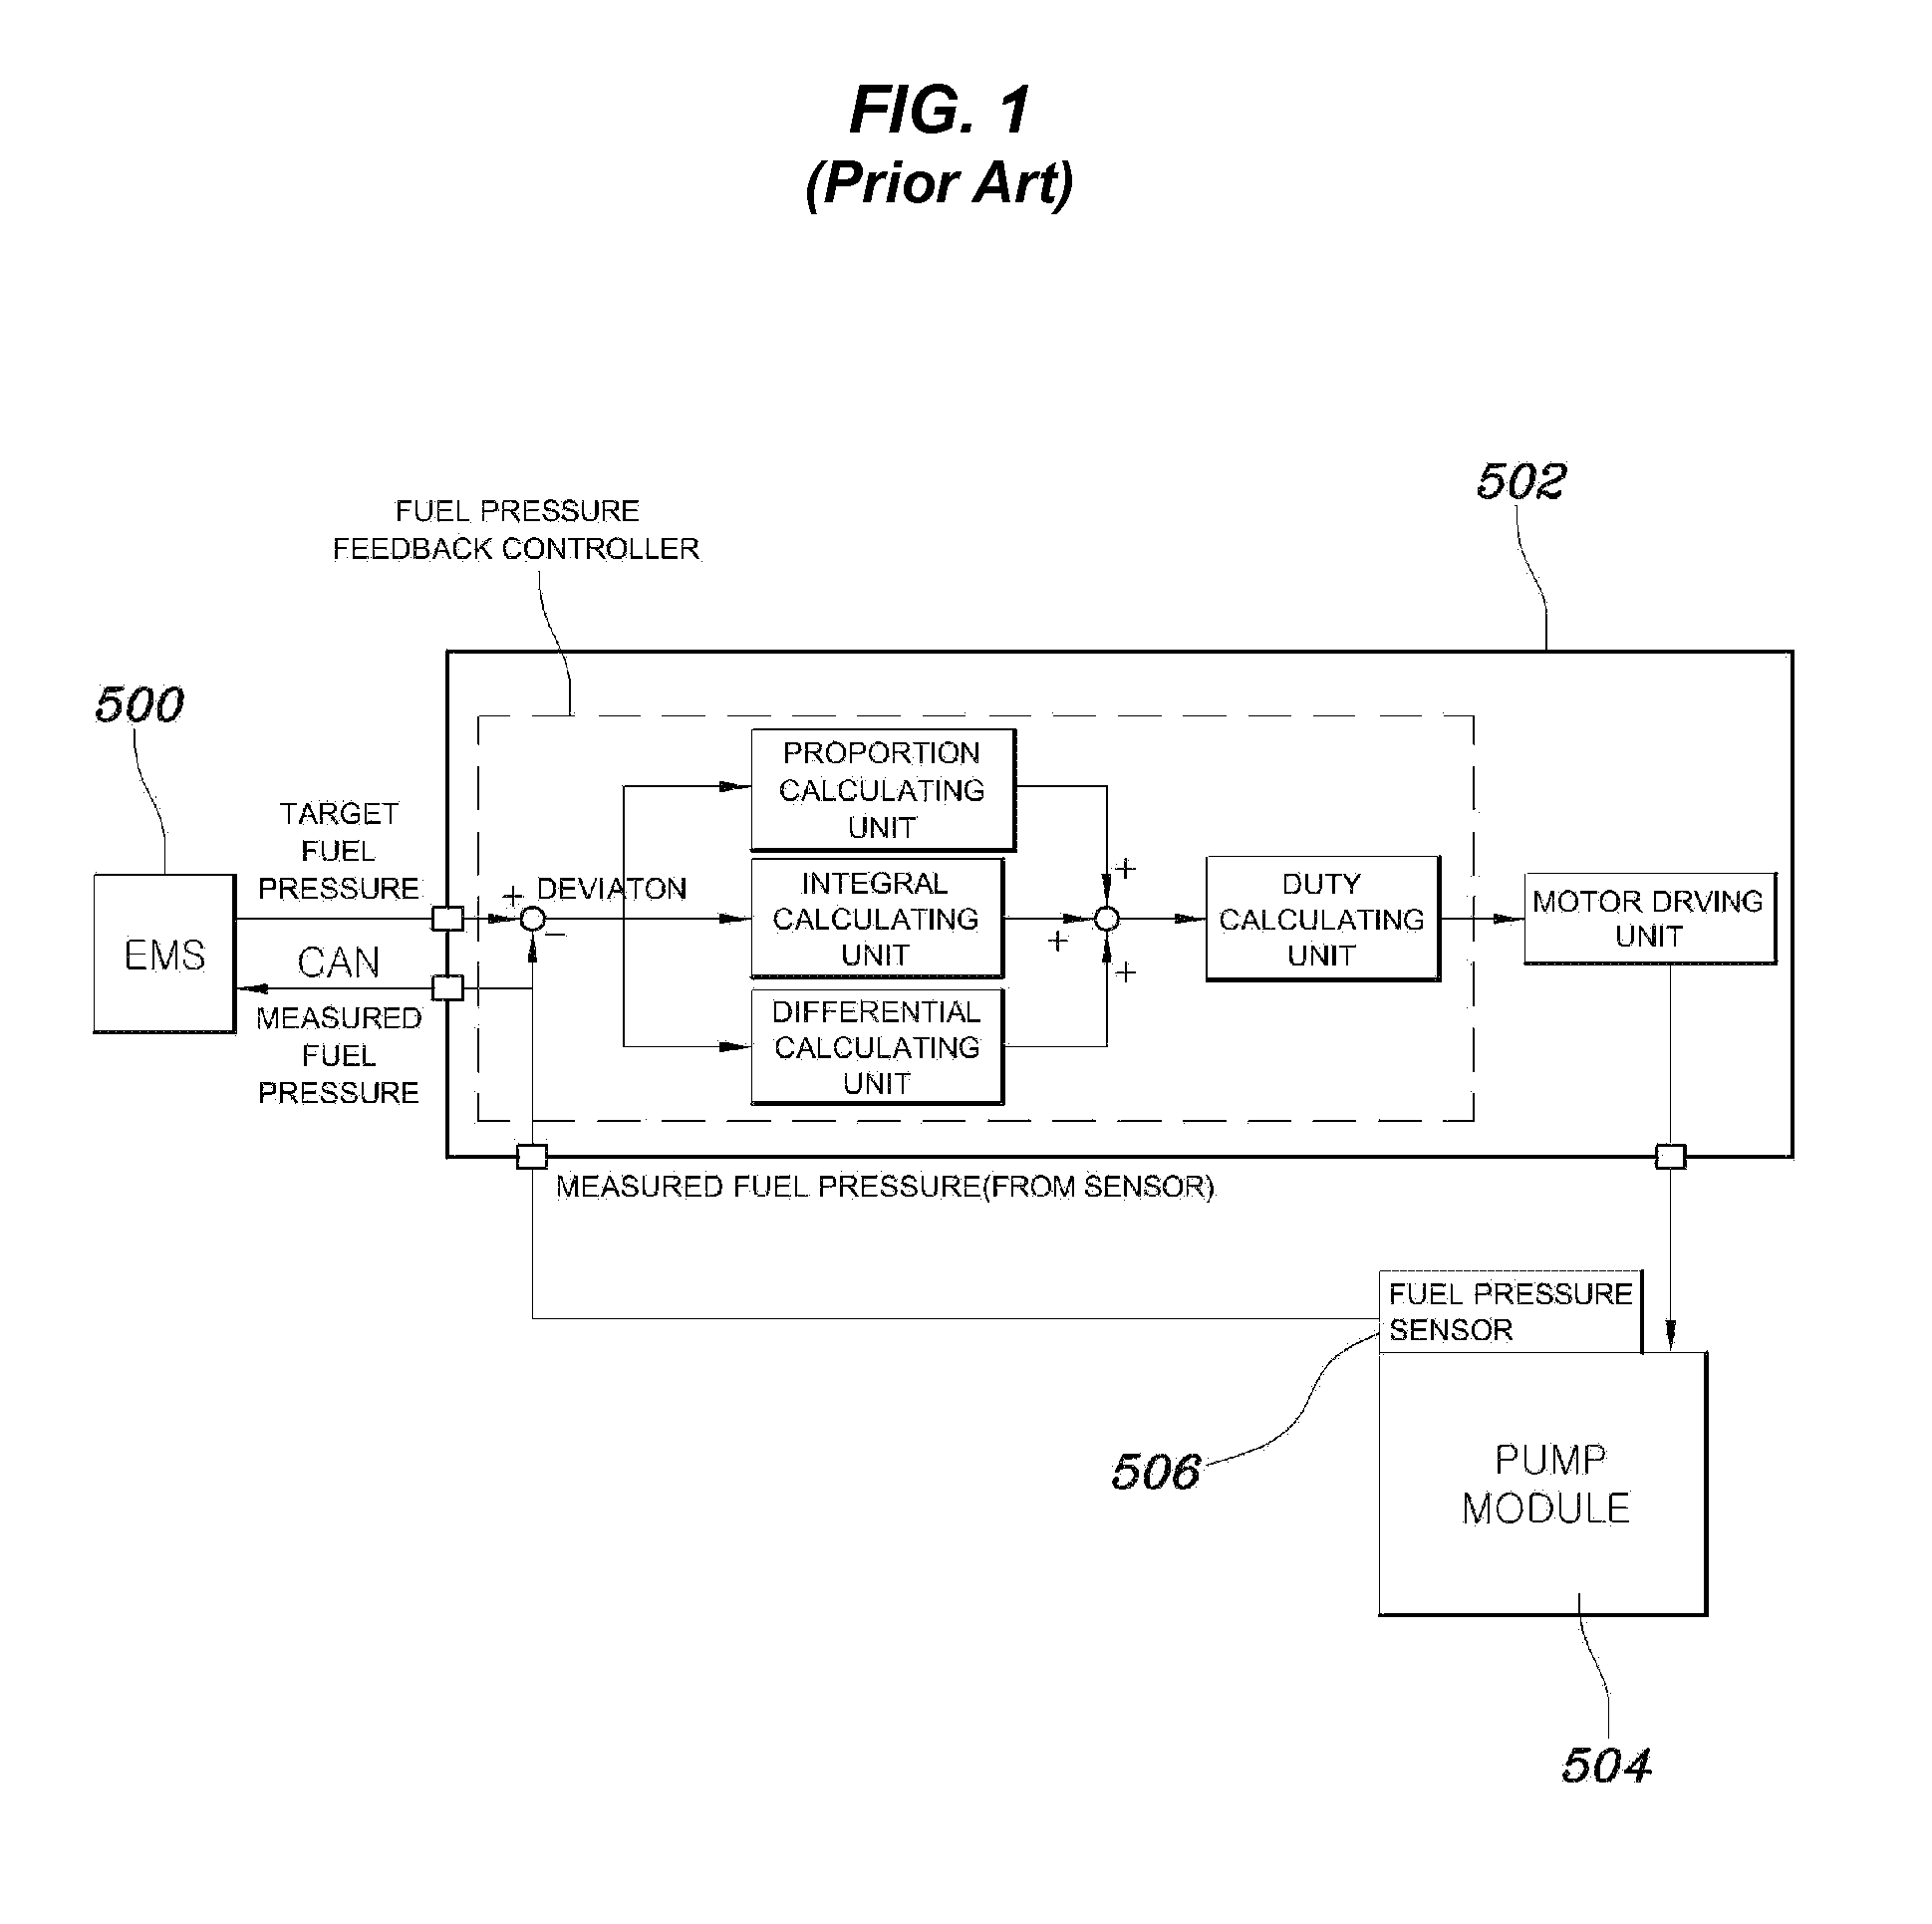 Method of controlling low-pressure fuel pump for gdi engine